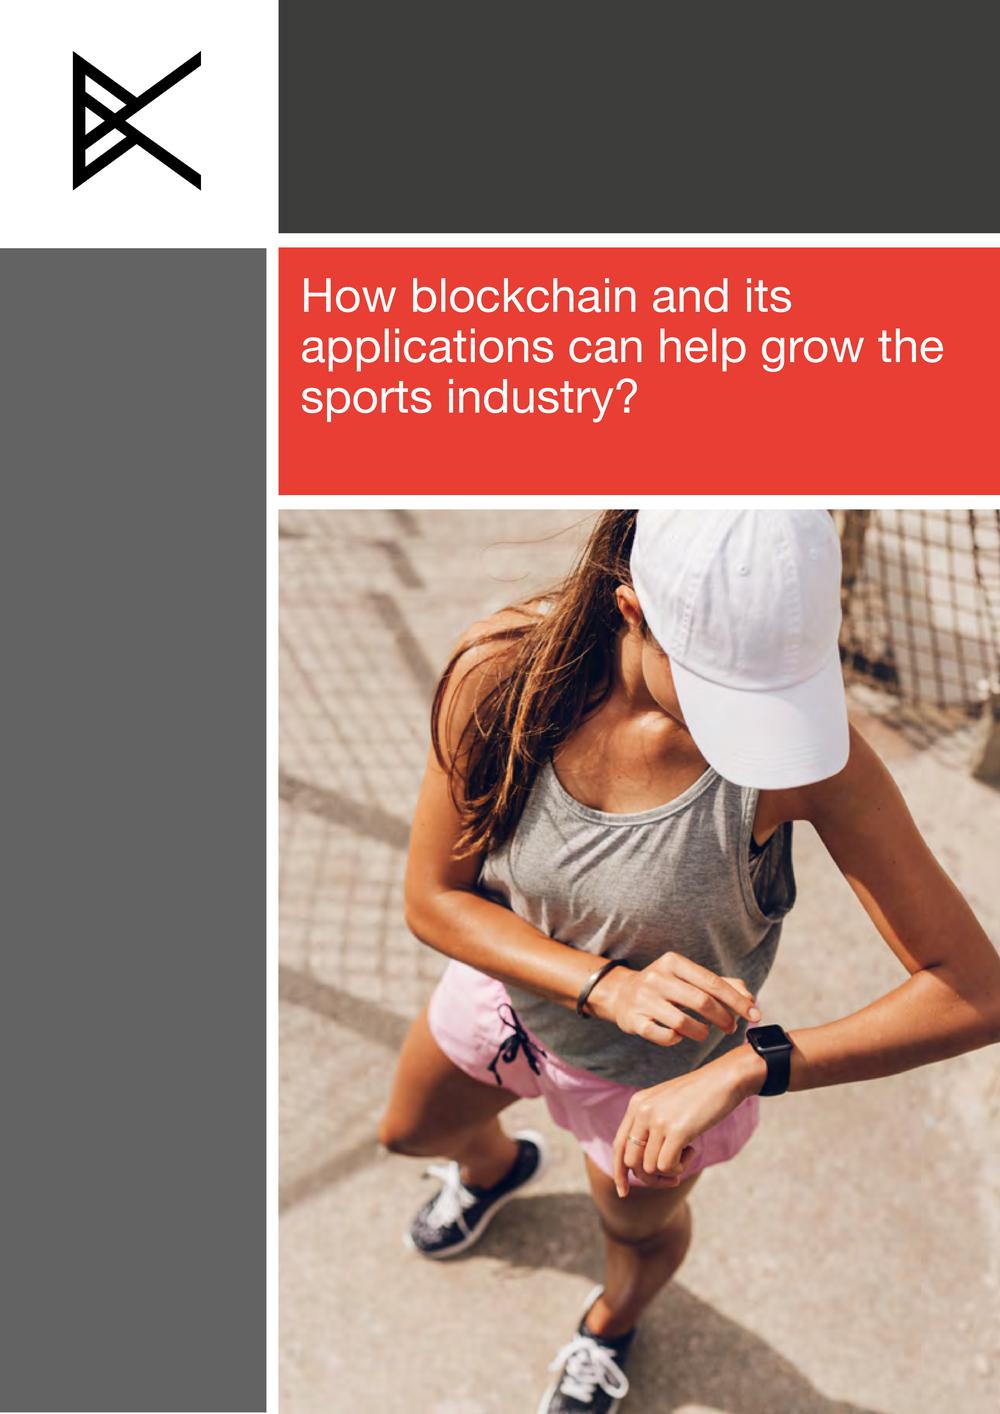 How blockchain and its applications can help grow the sports industry